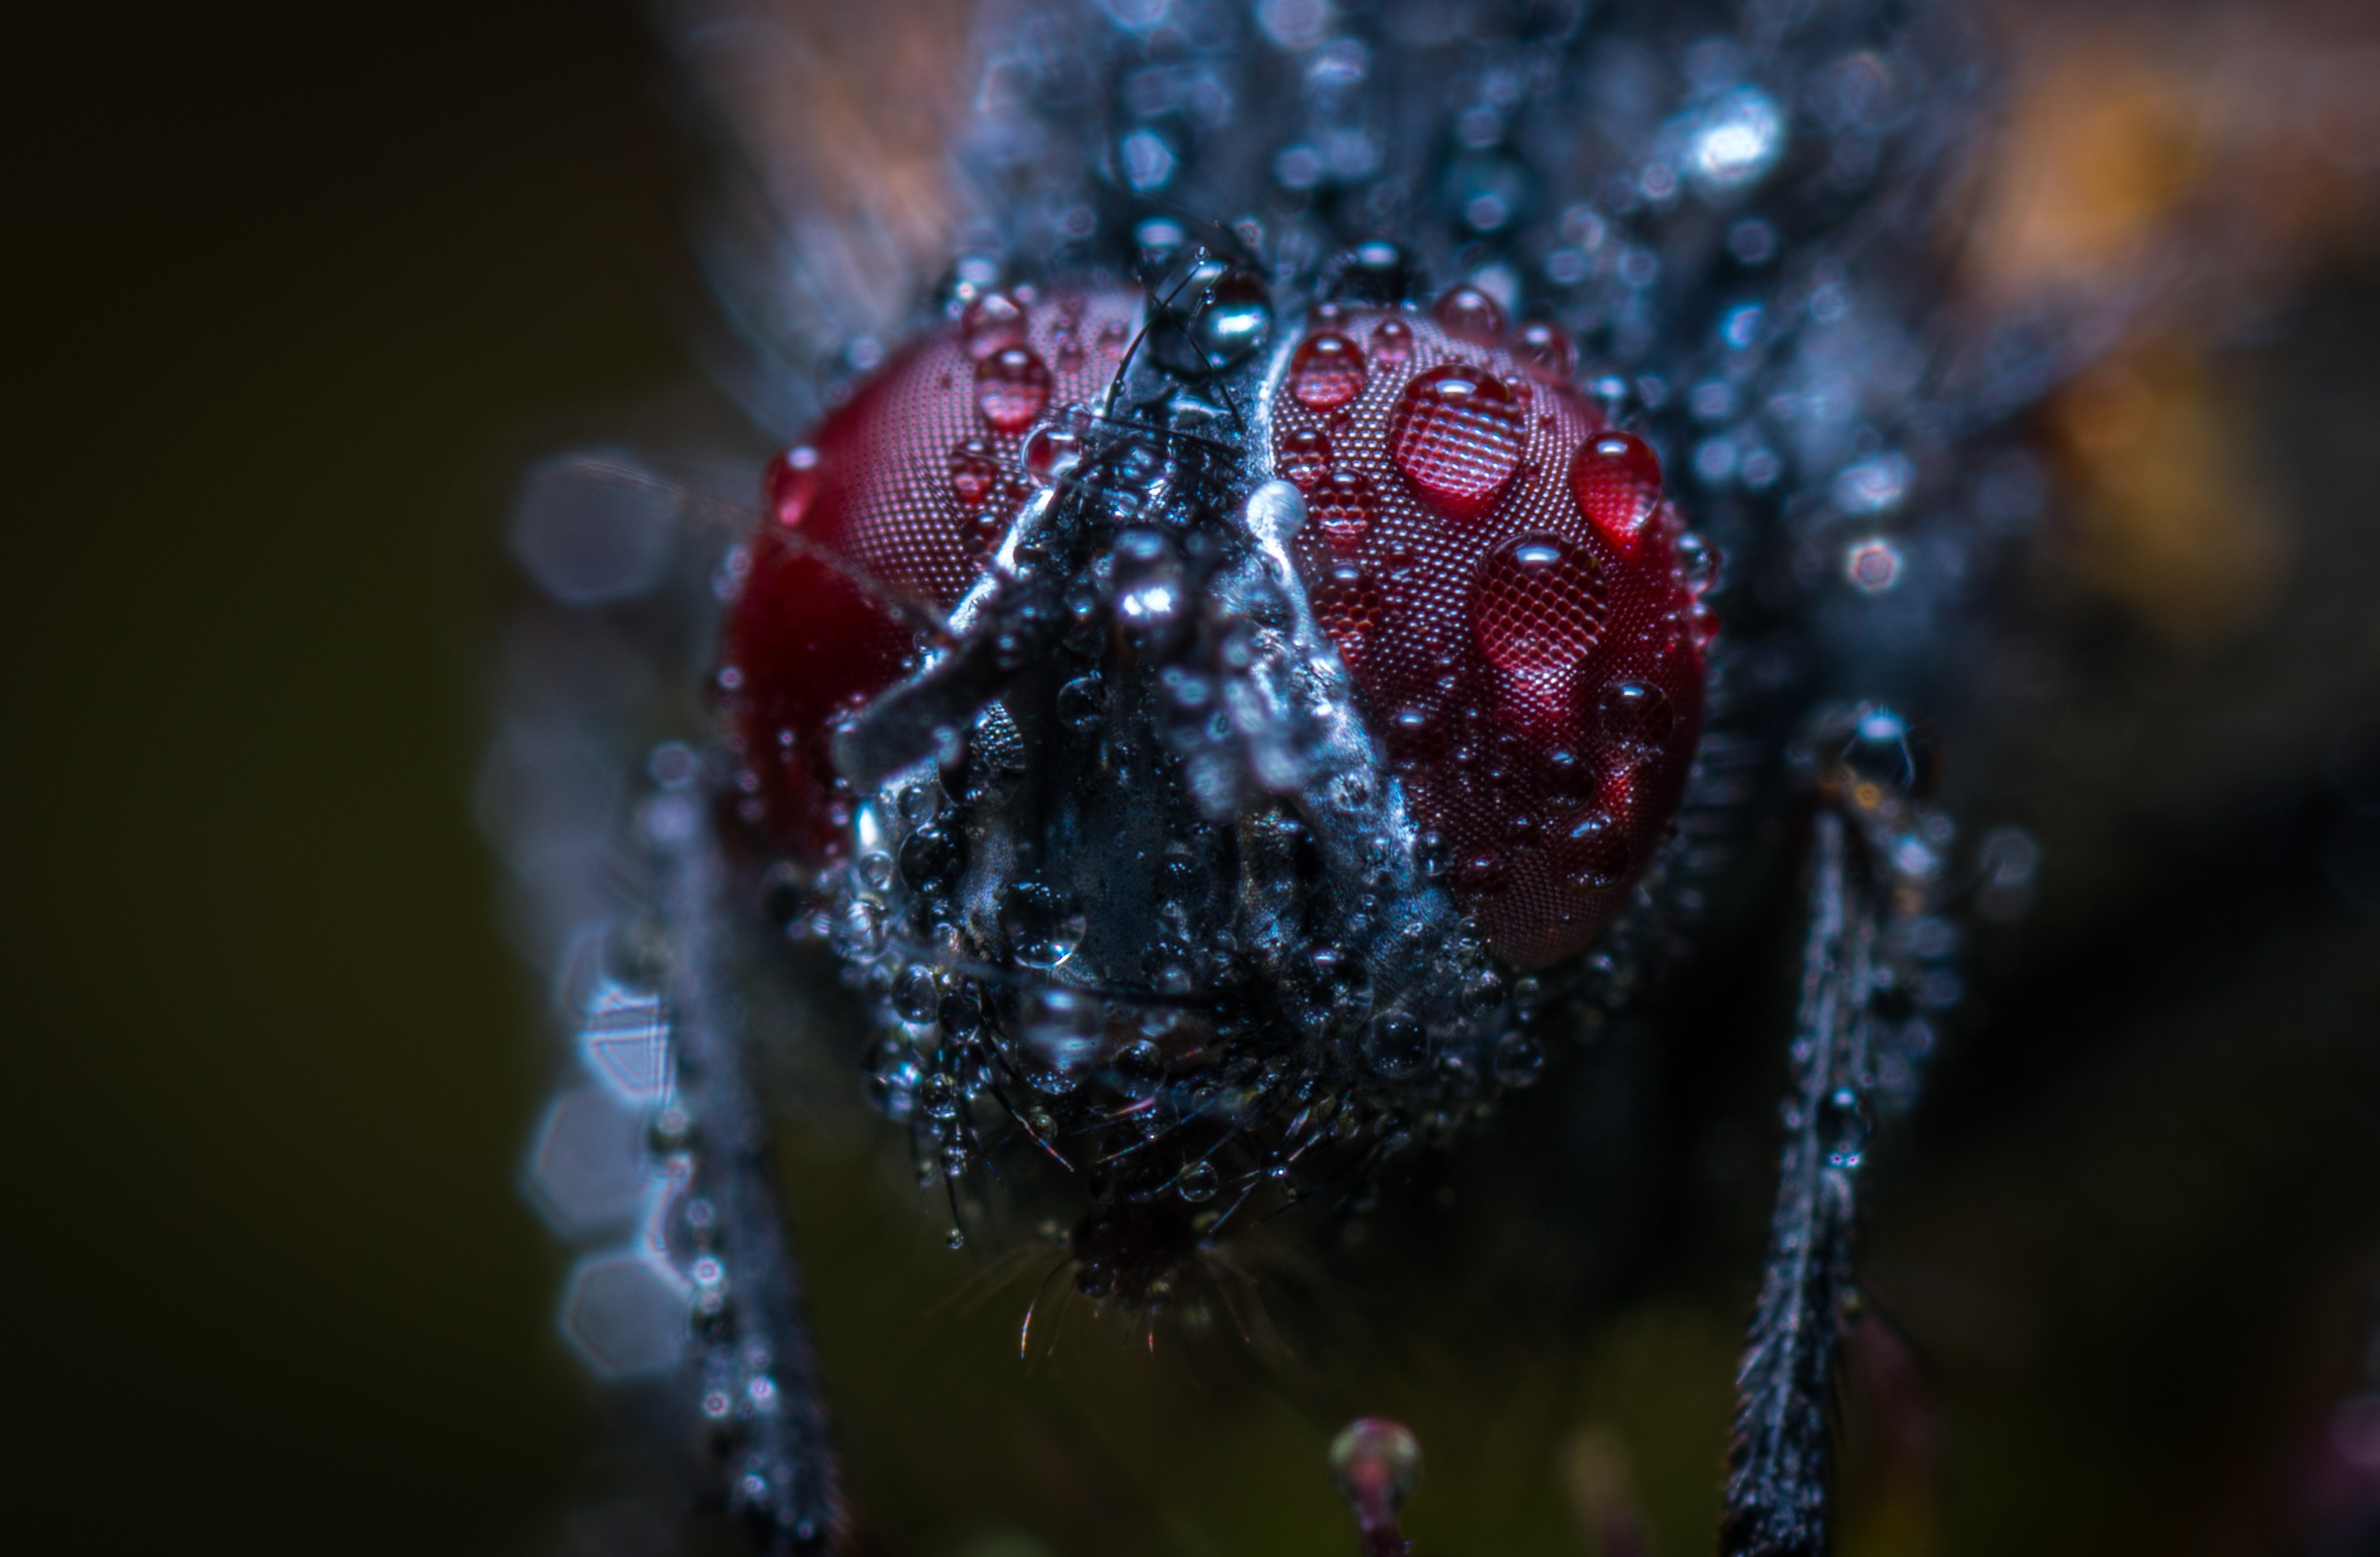 General 3900x2551 Egor Kamelev Fly bokeh depth of field blurred water drops wet body eyes closeup insect animals nature